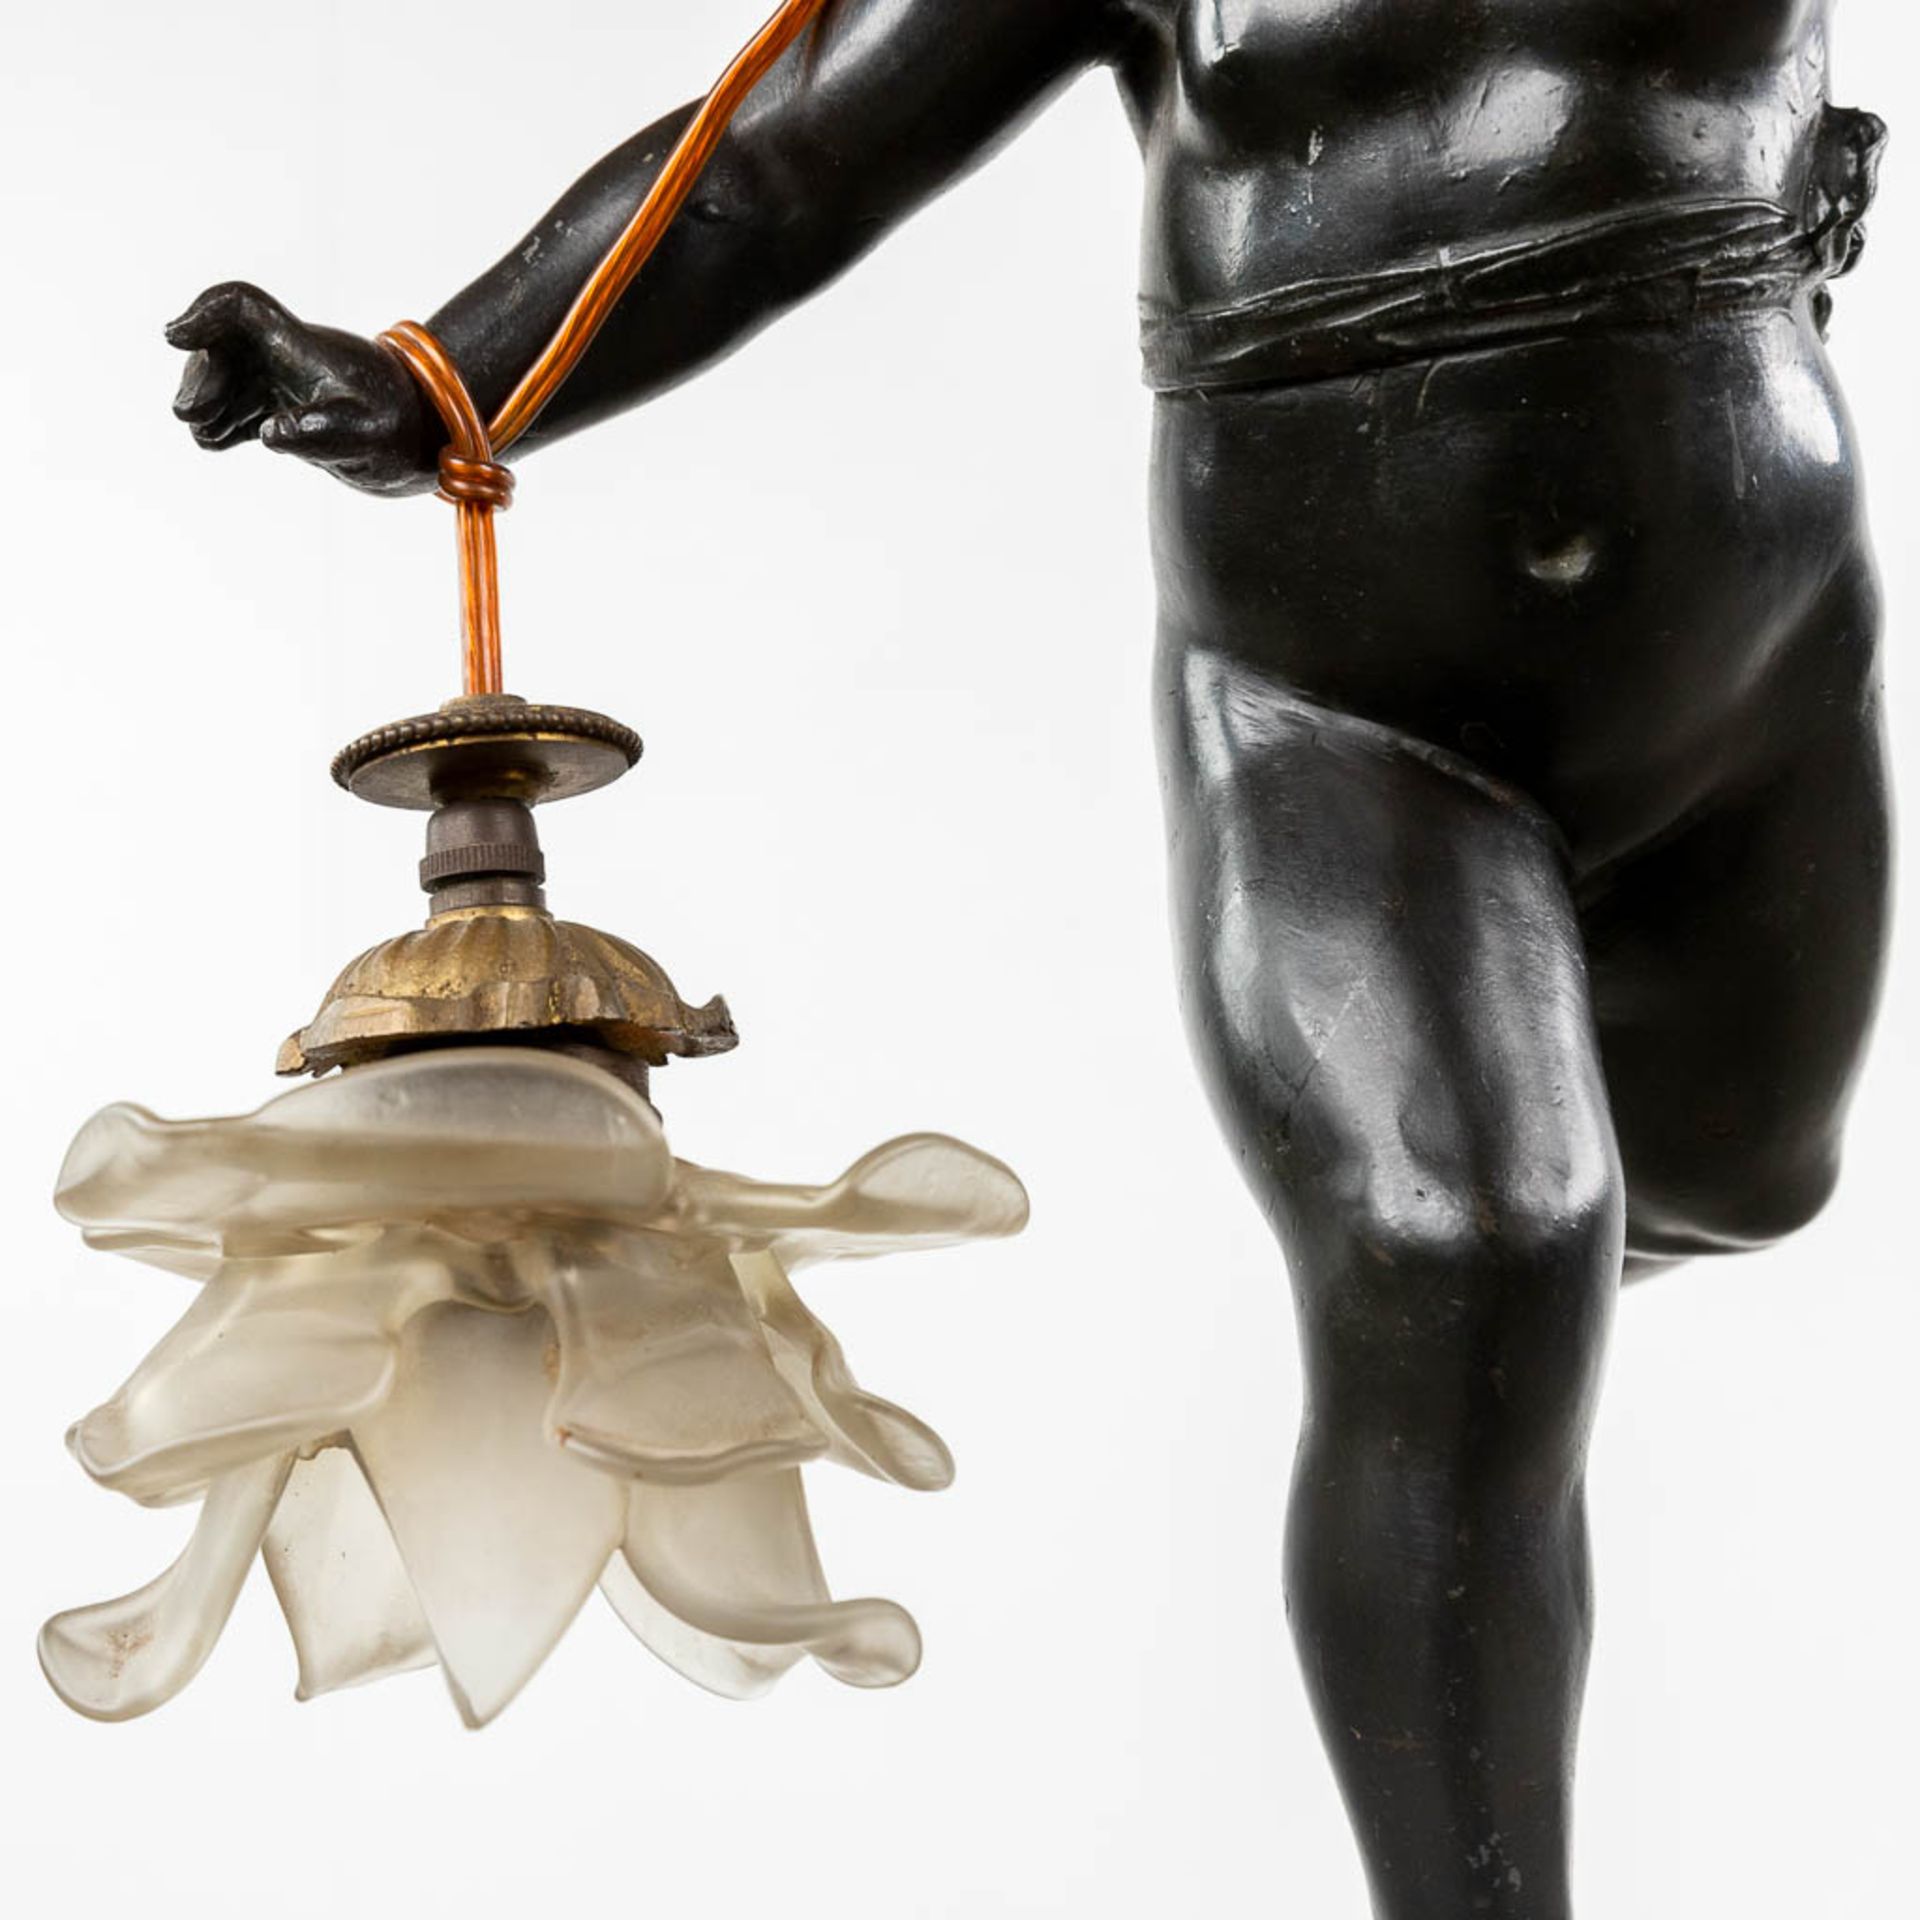 A hall lamp with a putto figurine, patinated bronze. Circa 1900. (W: 34 x H: 105 cm) - Image 3 of 10